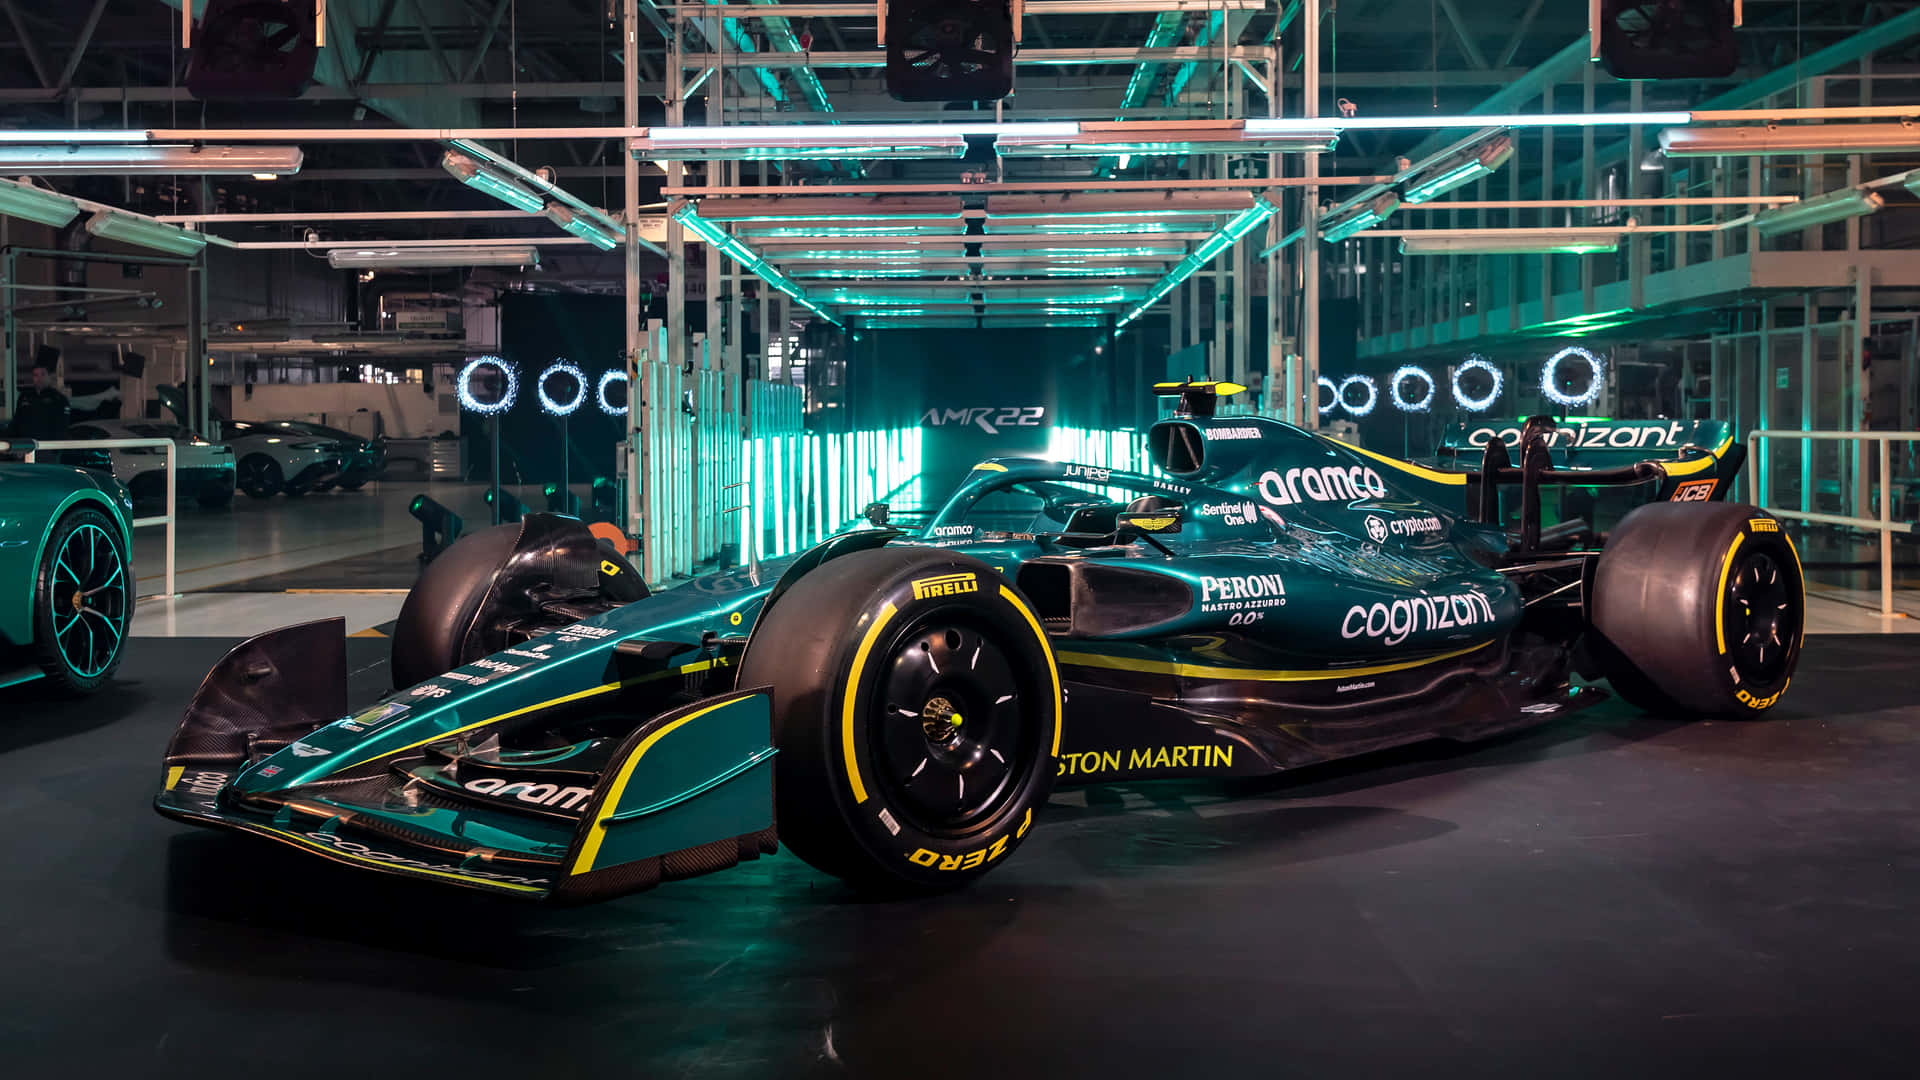 A Green Racing Car Is On Display In A Garage Wallpaper